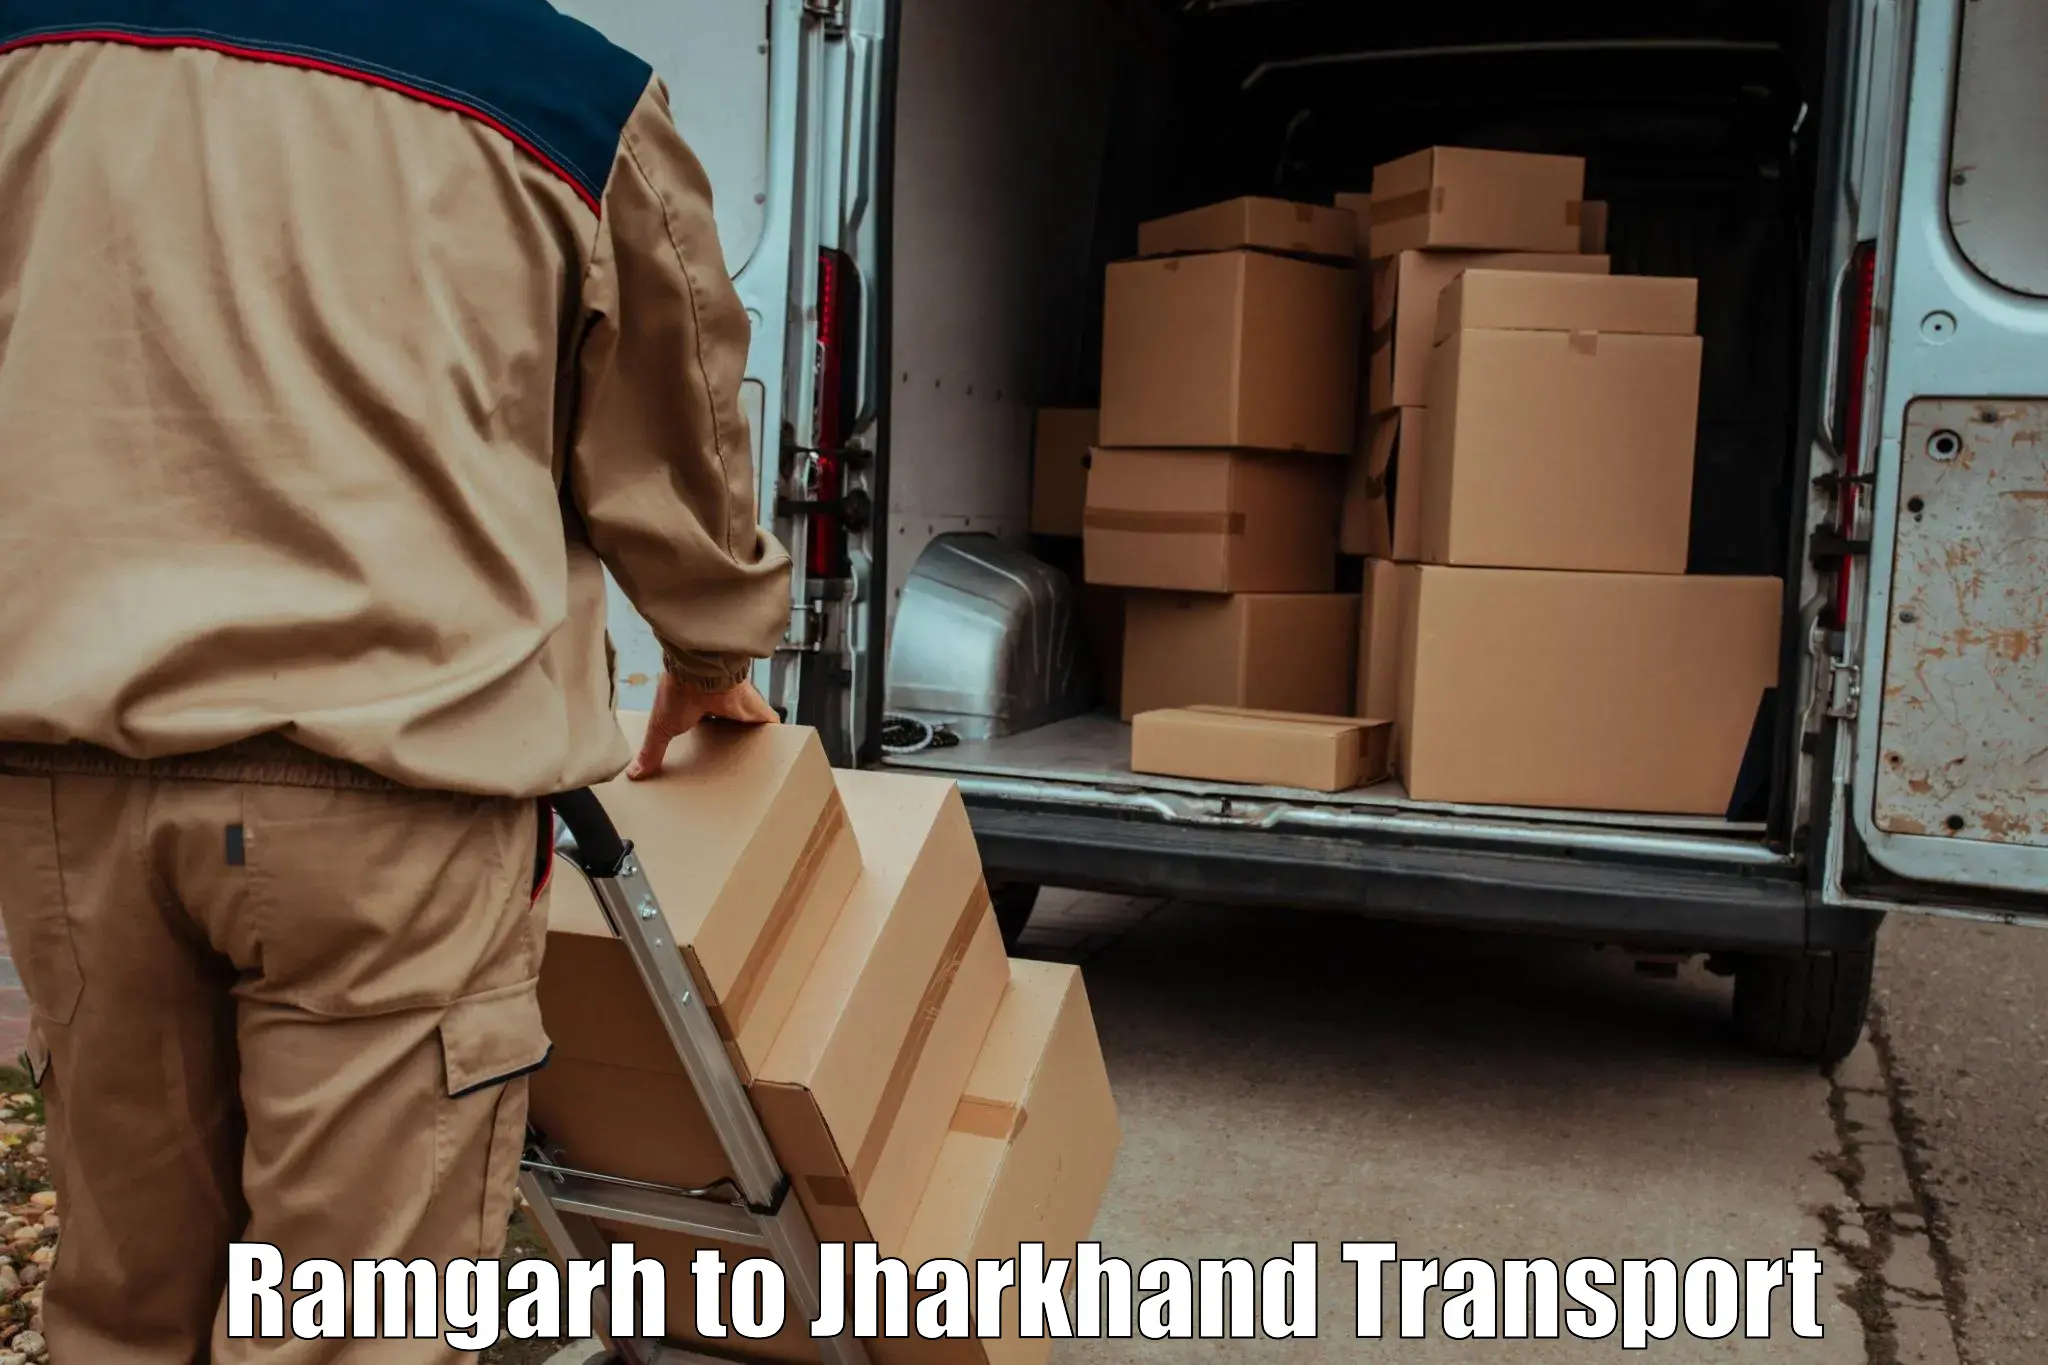 Land transport services in Ramgarh to Ranchi